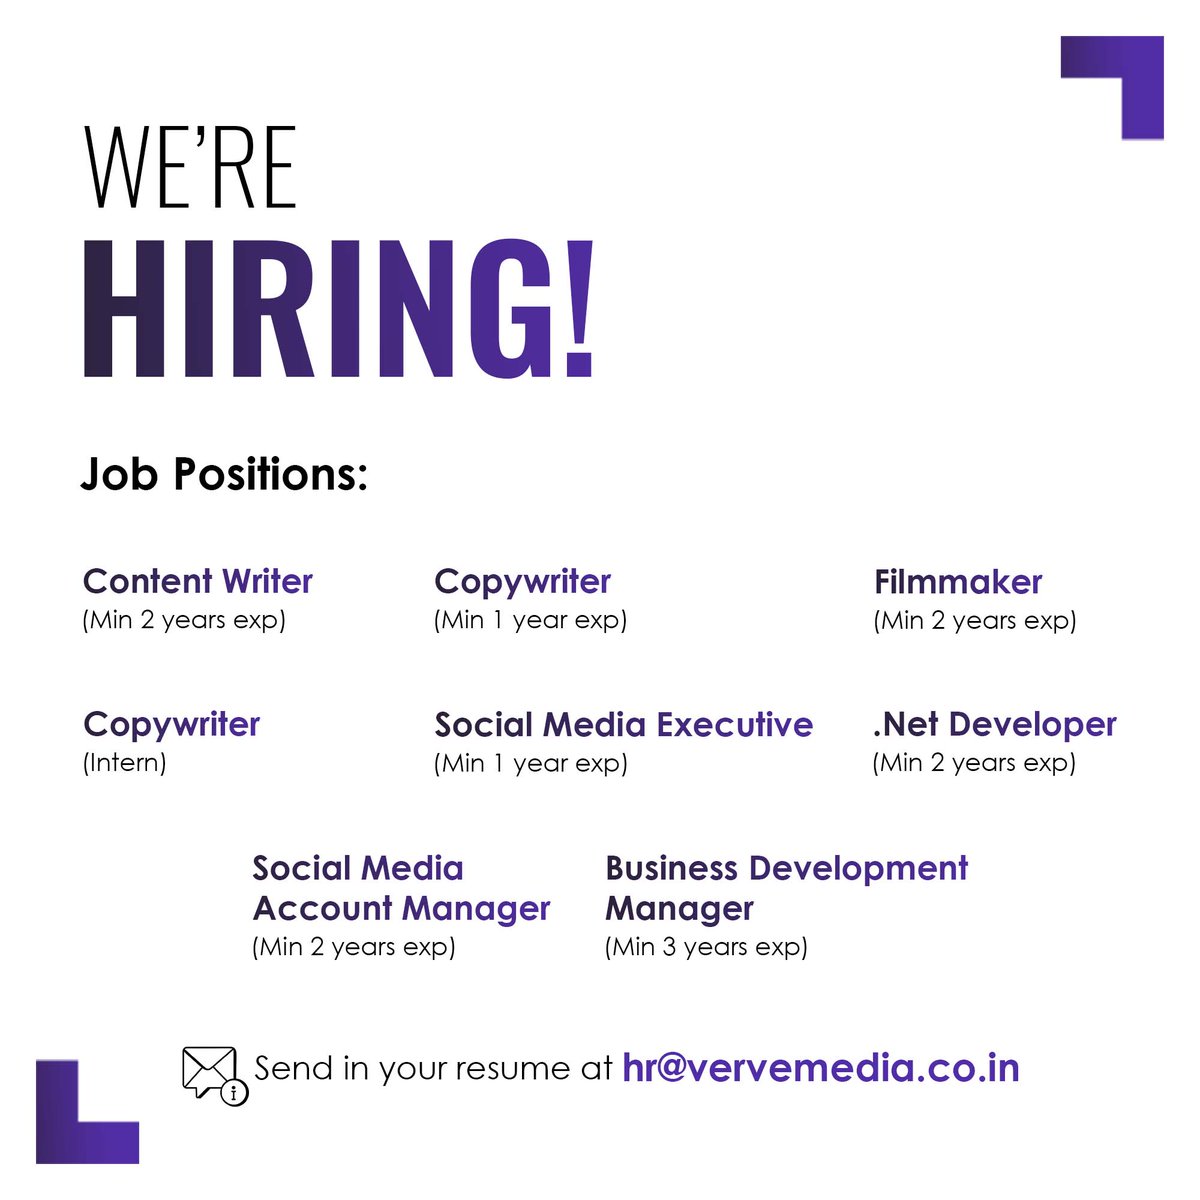 HIRING ALERT!

Whether you're a creative mastermind, a tech wizard, or a social media guru, we have the perfect role for you.

Think your skills match these roles? Don't be shy, come apply! 

#Vervemedia #digitalagency #agencyjobs #jobalert #wearehiring #socialmediajobs